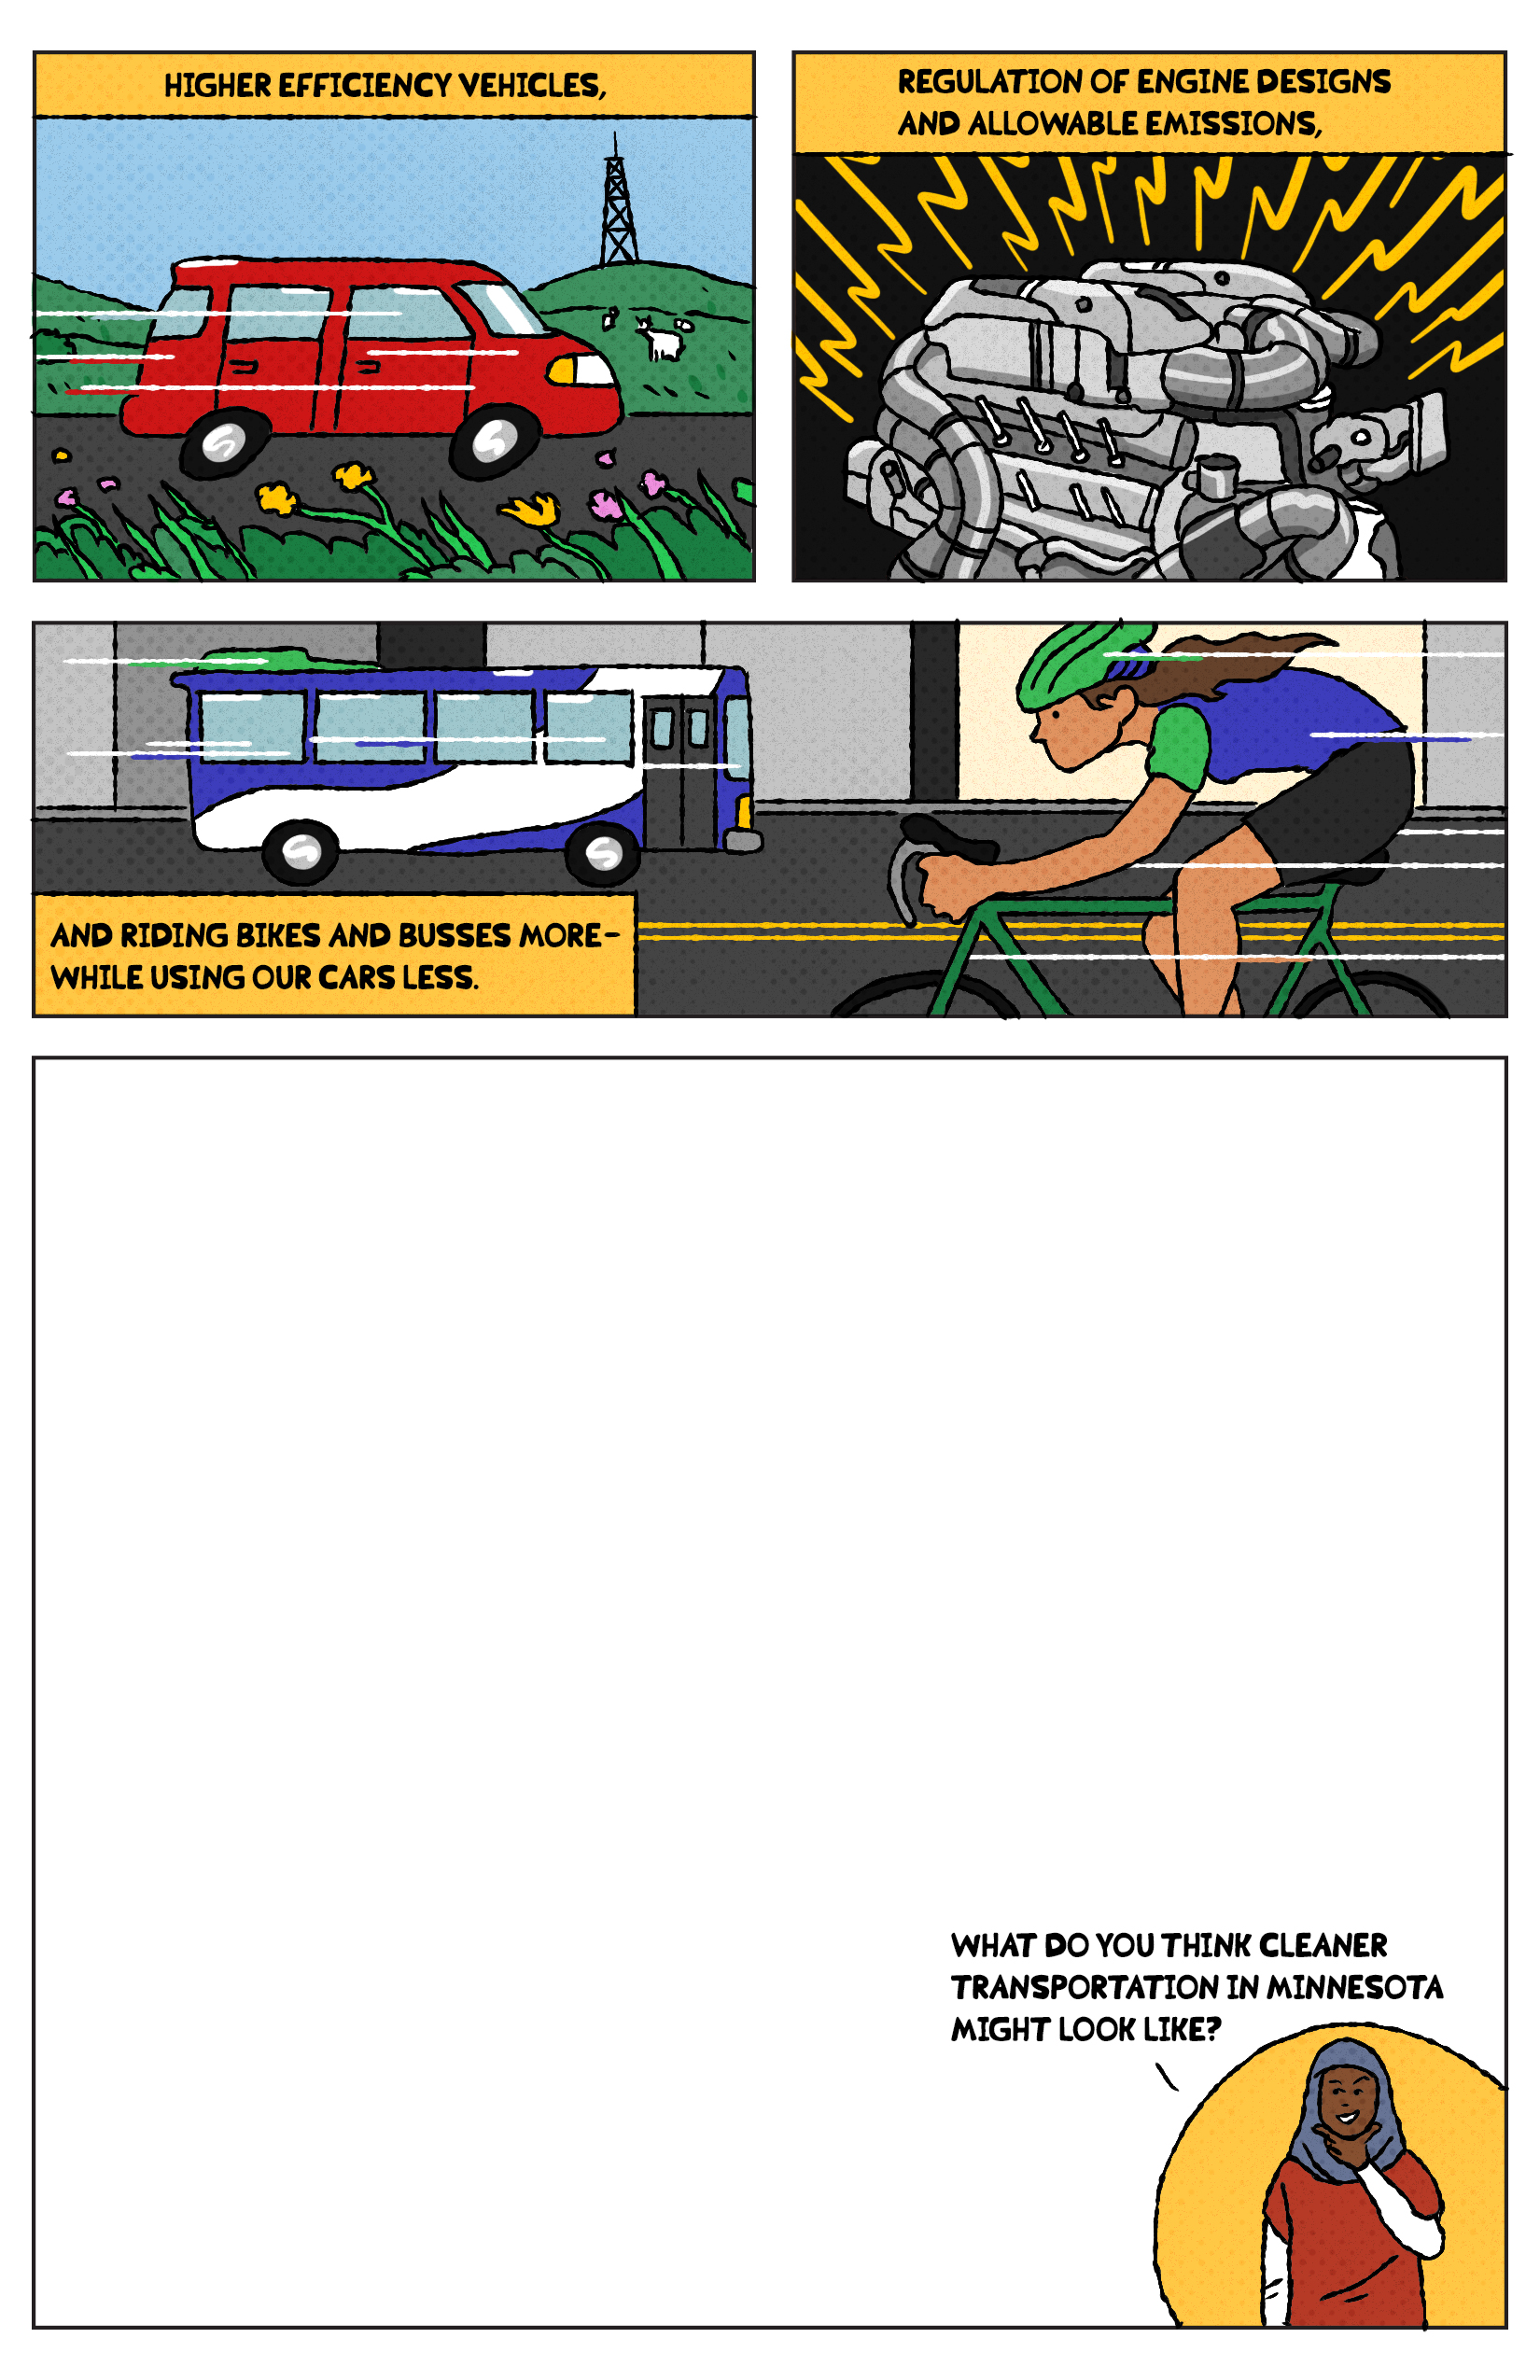 Back side of Comic used for the Statewide Multimodal Transportation Plan to talk about air quality as it relates to transportation.